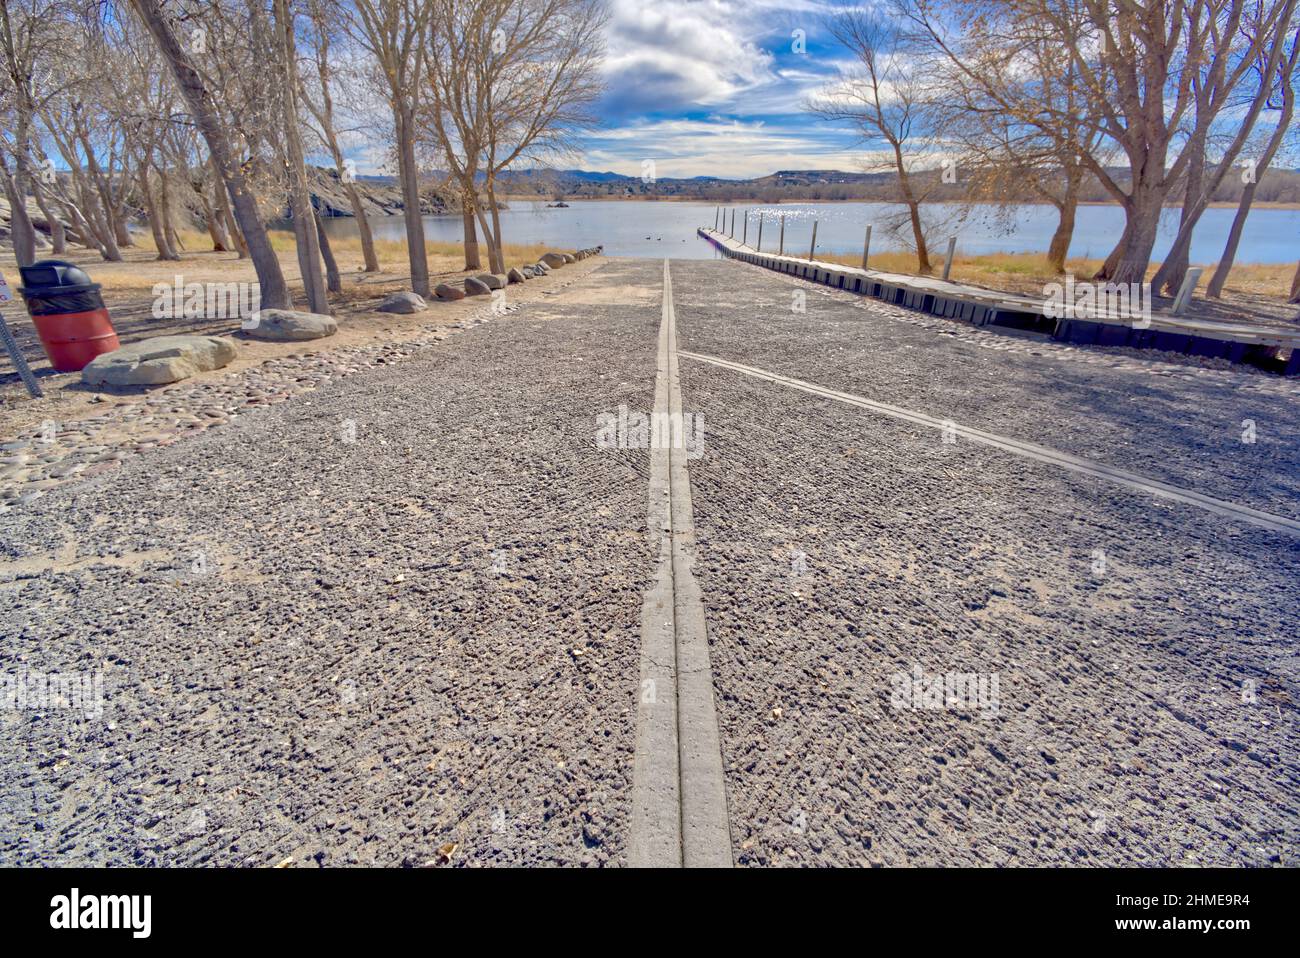 The boat ramp at Willow Lake in Prescott Arizona. This is a public park. No property release is needed. Stock Photo